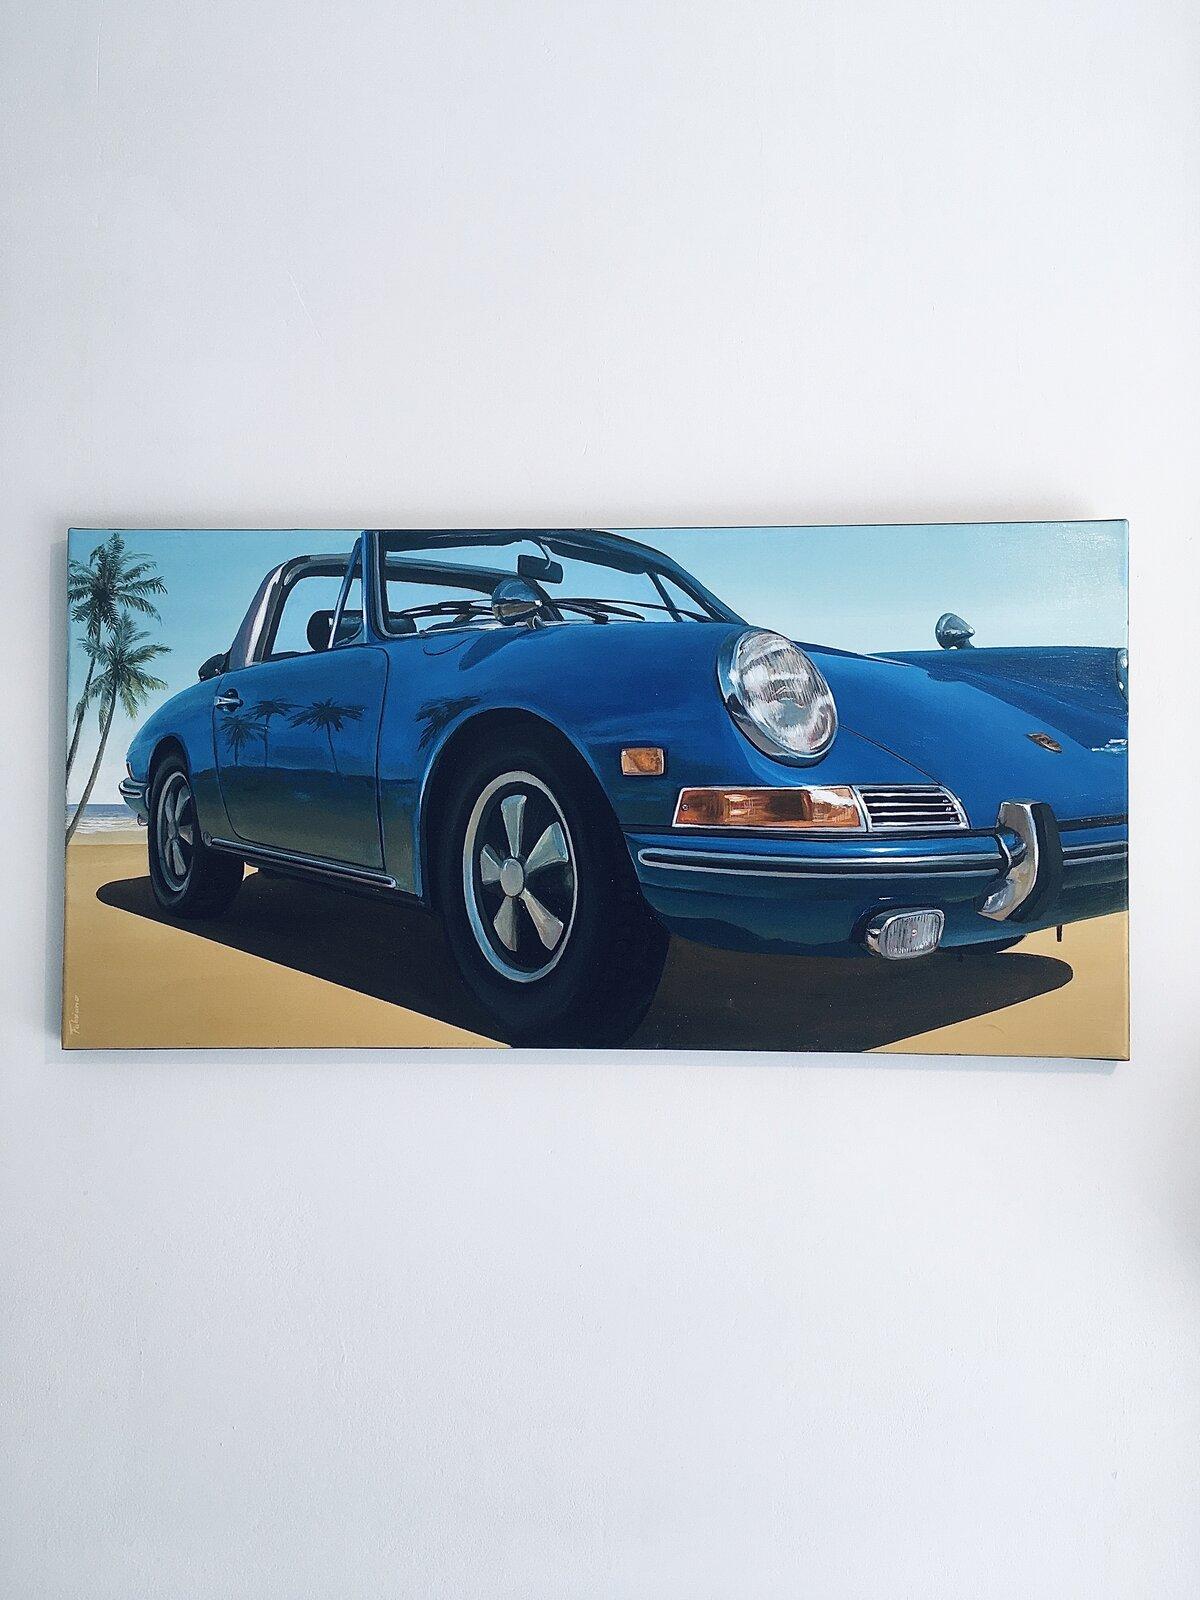 FLORIDA BEACH-Porsche 911 TARGA-original realism still life oil painting-Art - Abstract Impressionist Painting by Fabriano